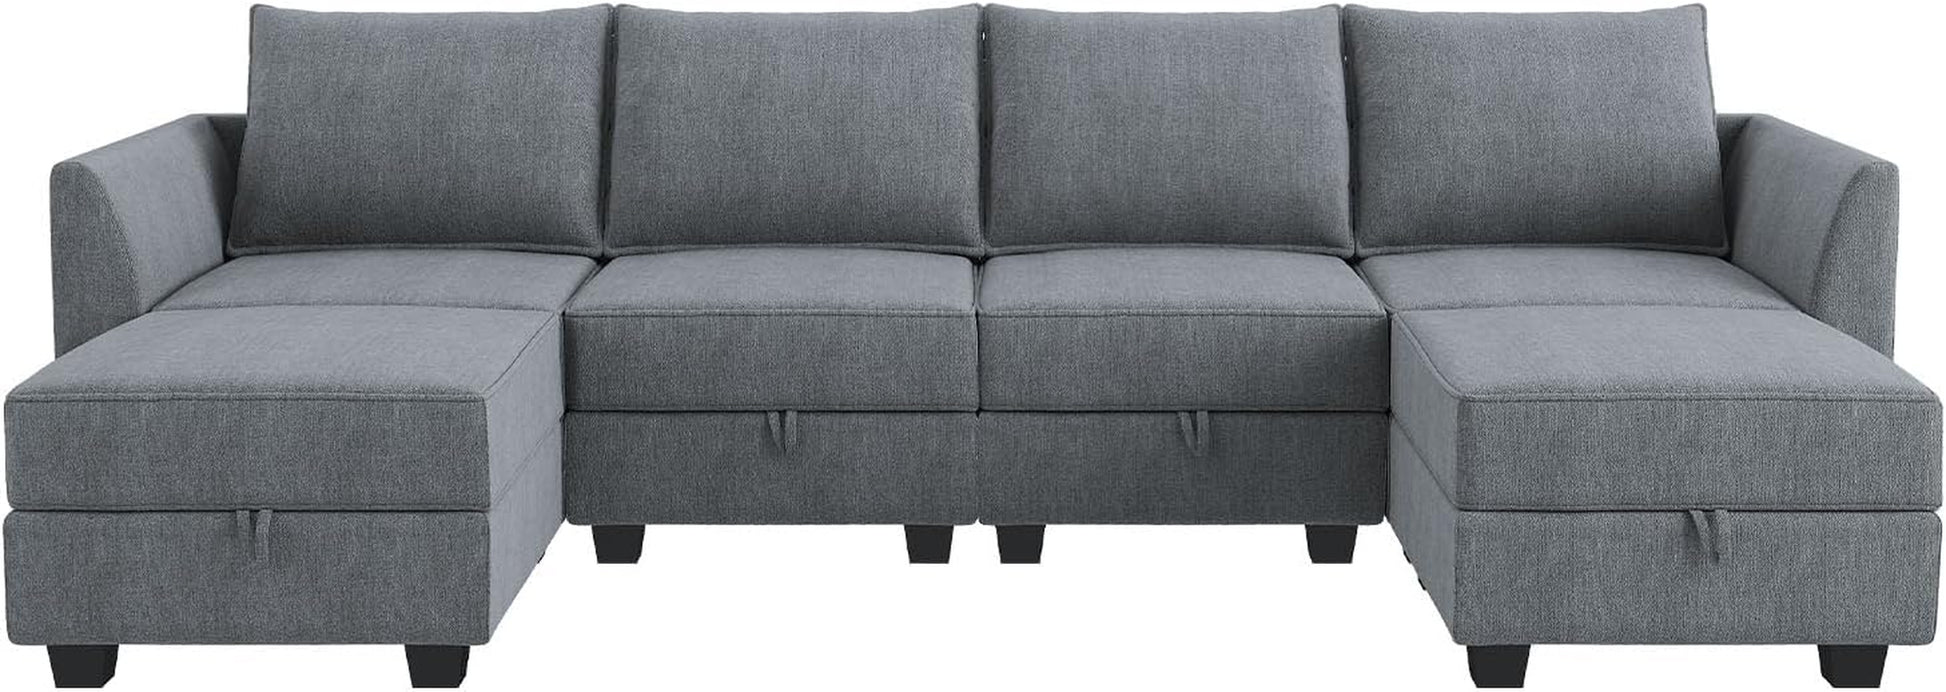 Modern U-Shaped Modular Sectional Sofa Sleeper Couch with Reversible Chaise Modular Sofa Couch with Storage Seats, Bluish Grey